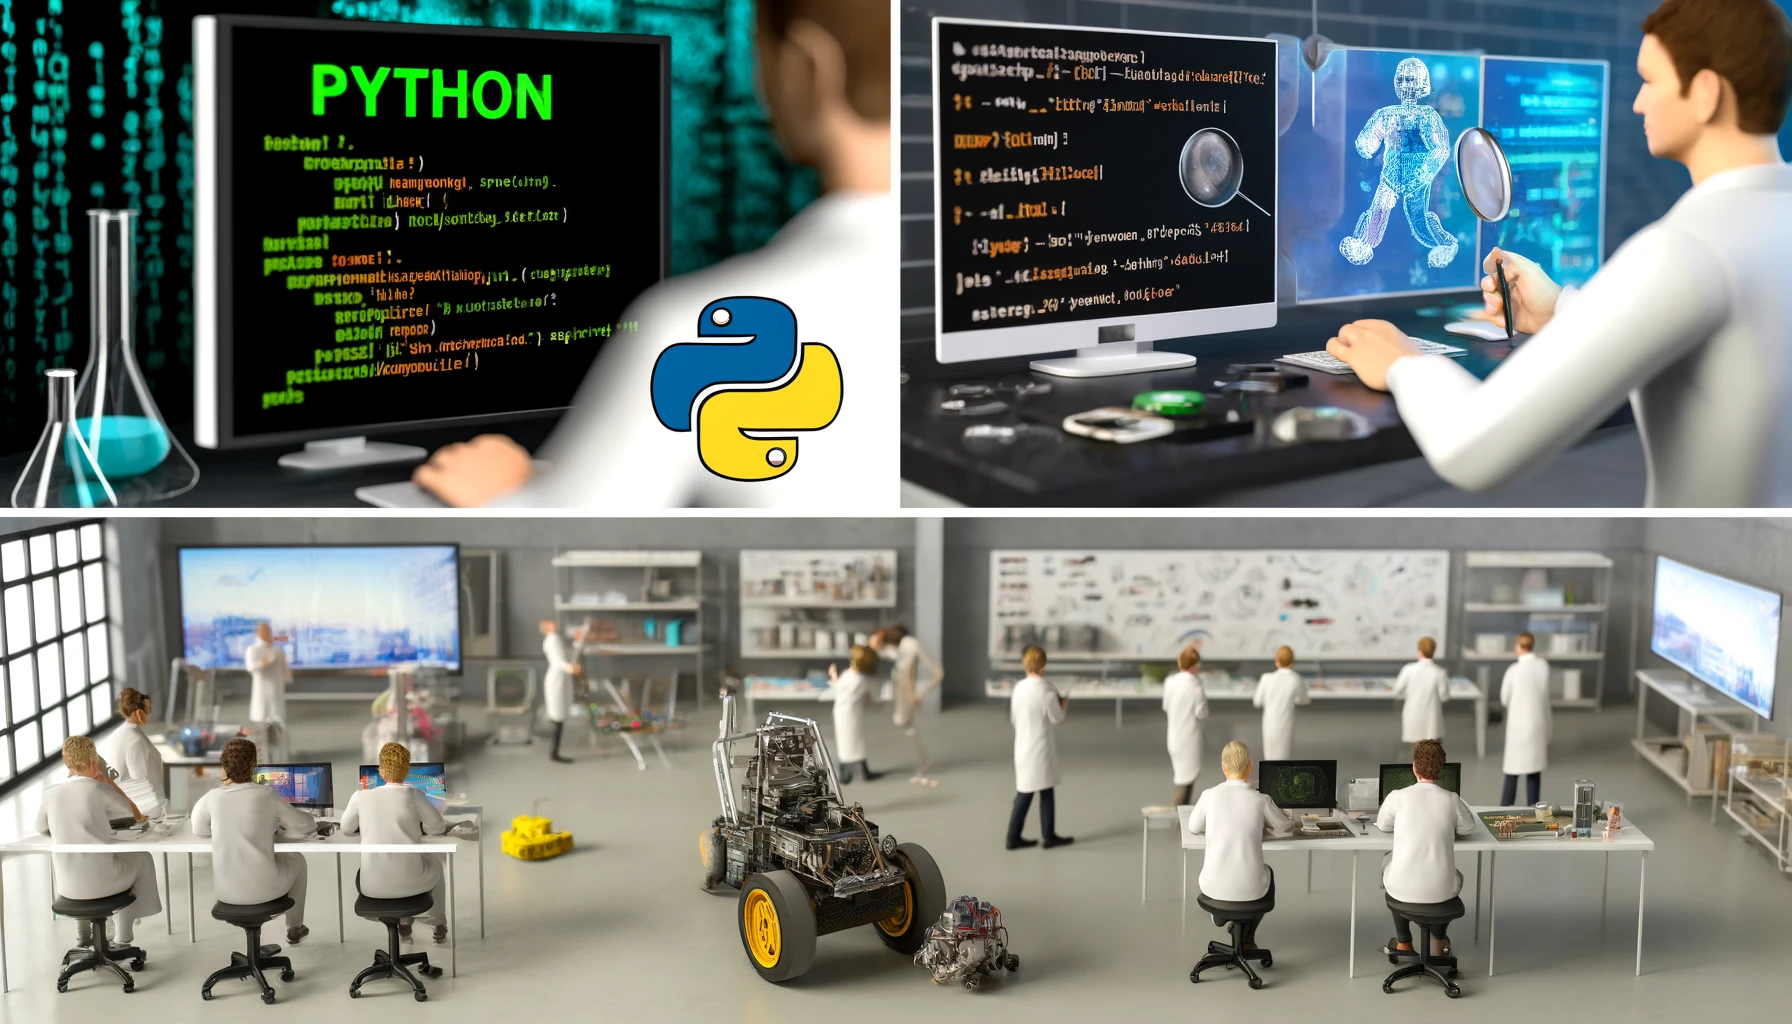 These images show scenarios from coding Python in a work environment, to its application in robotics and various AI-powered technologies, such as smart home systems and automated healthcare solutions.